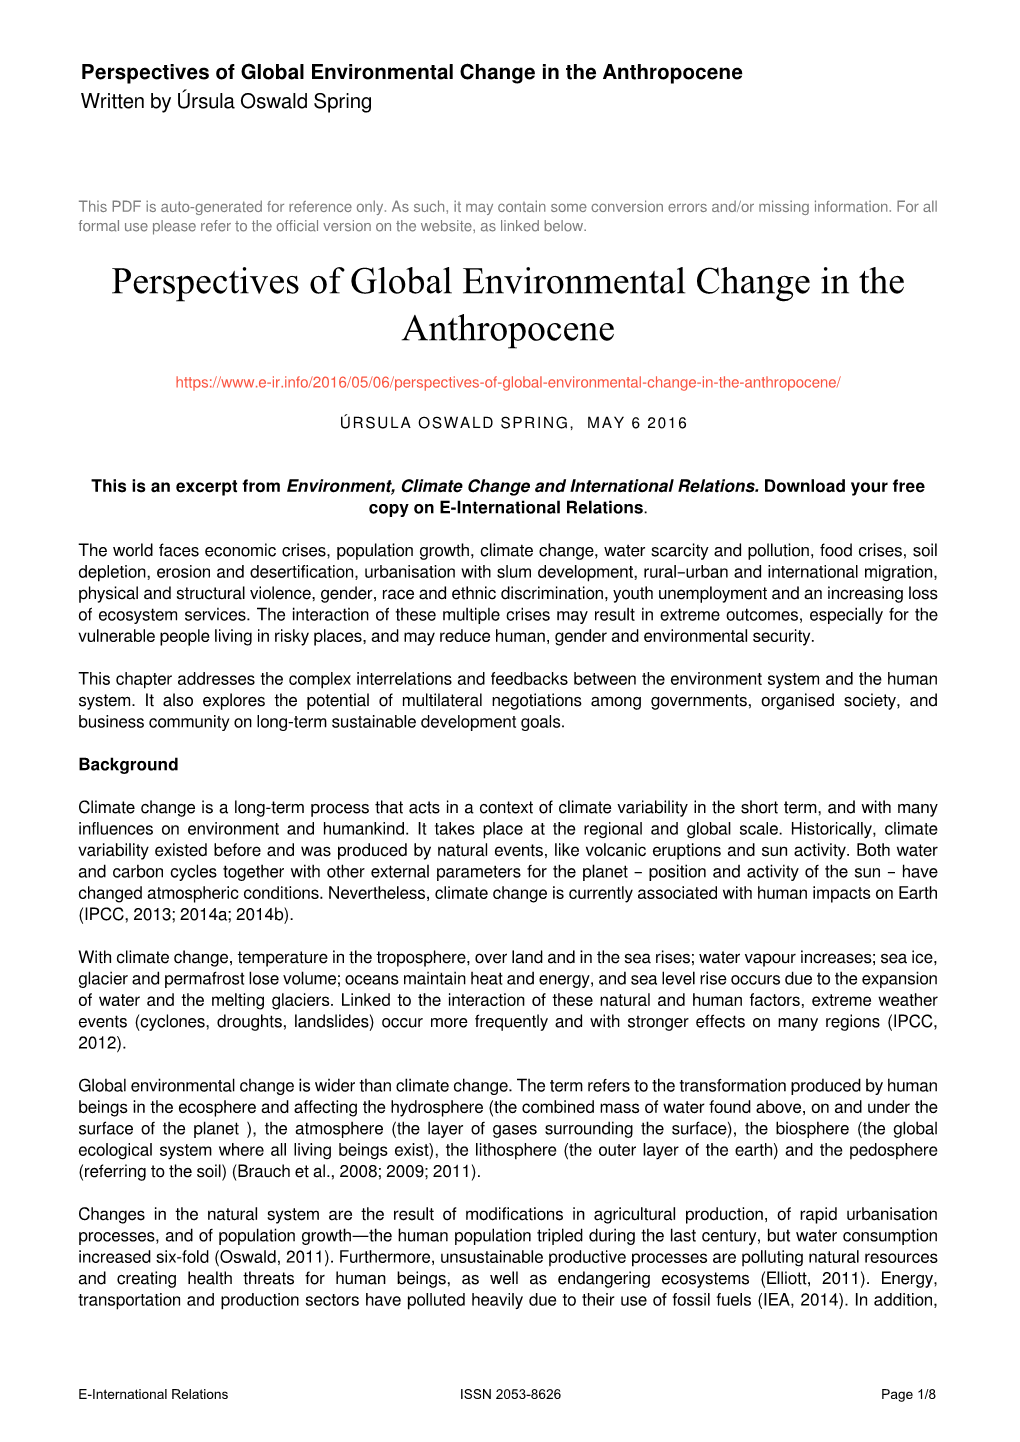 Perspectives of Global Environmental Change in the Anthropocene Written by Úrsula Oswald Spring